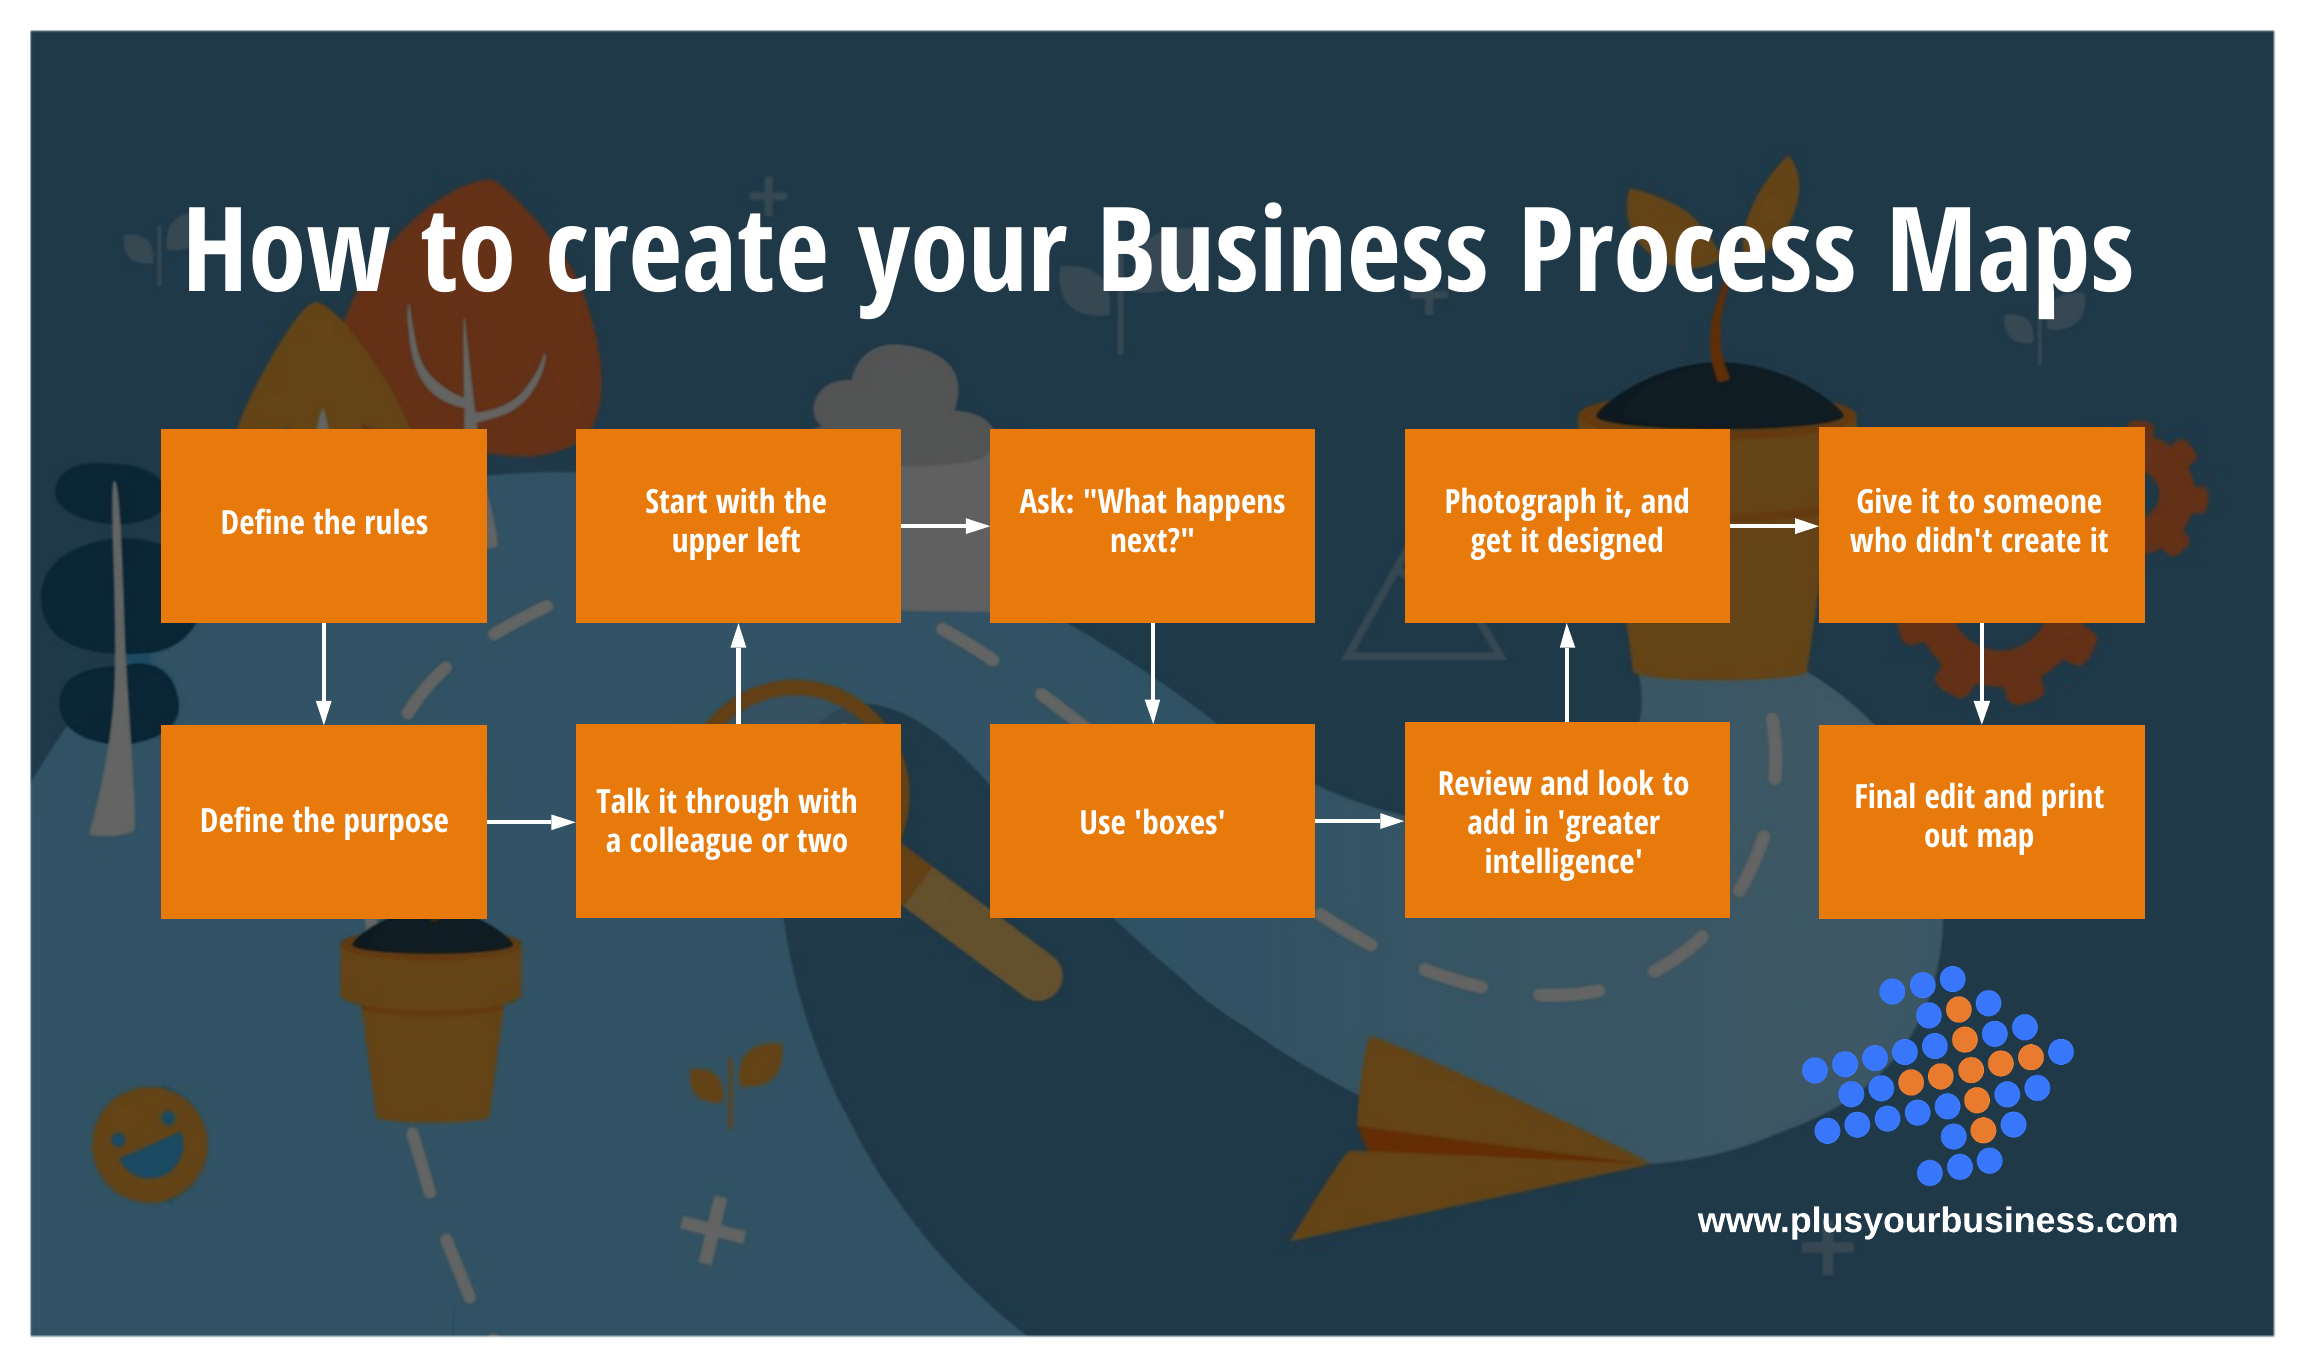 how to create a business process model